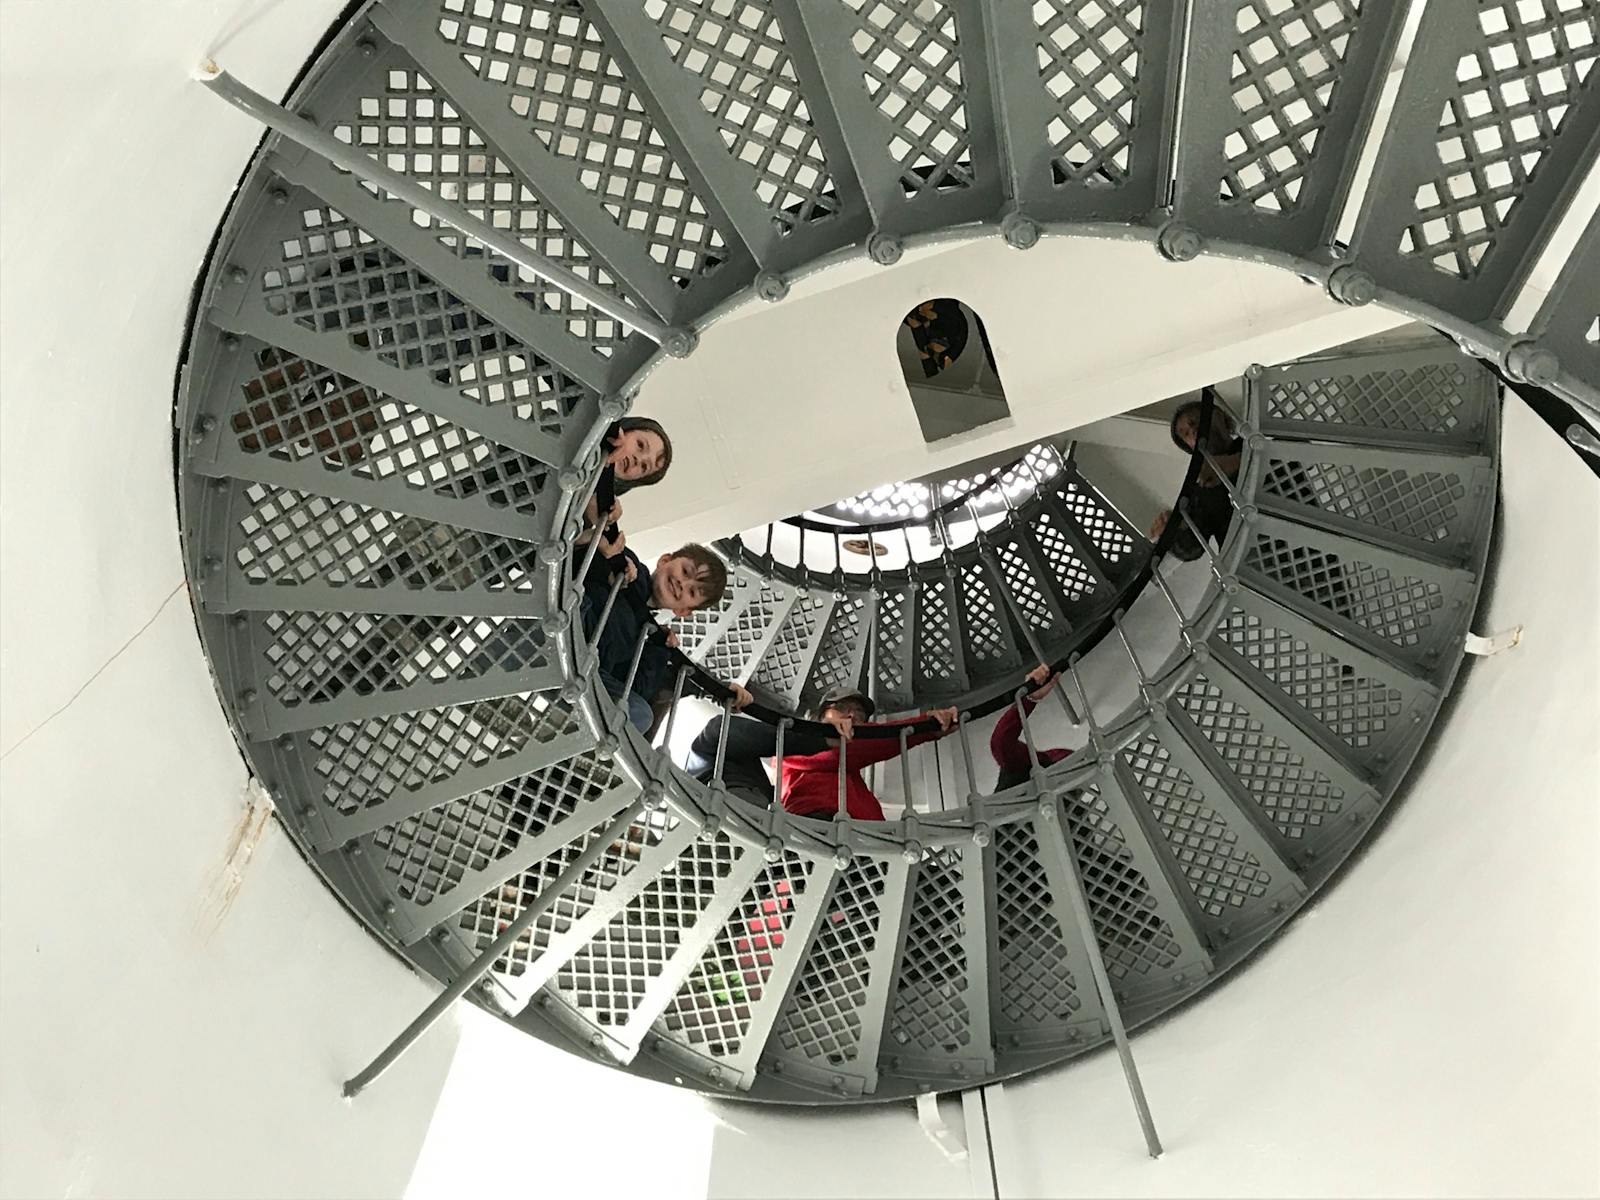 Climb the 100 year old spiral stairs inside the Cape Bruny Lighthouse